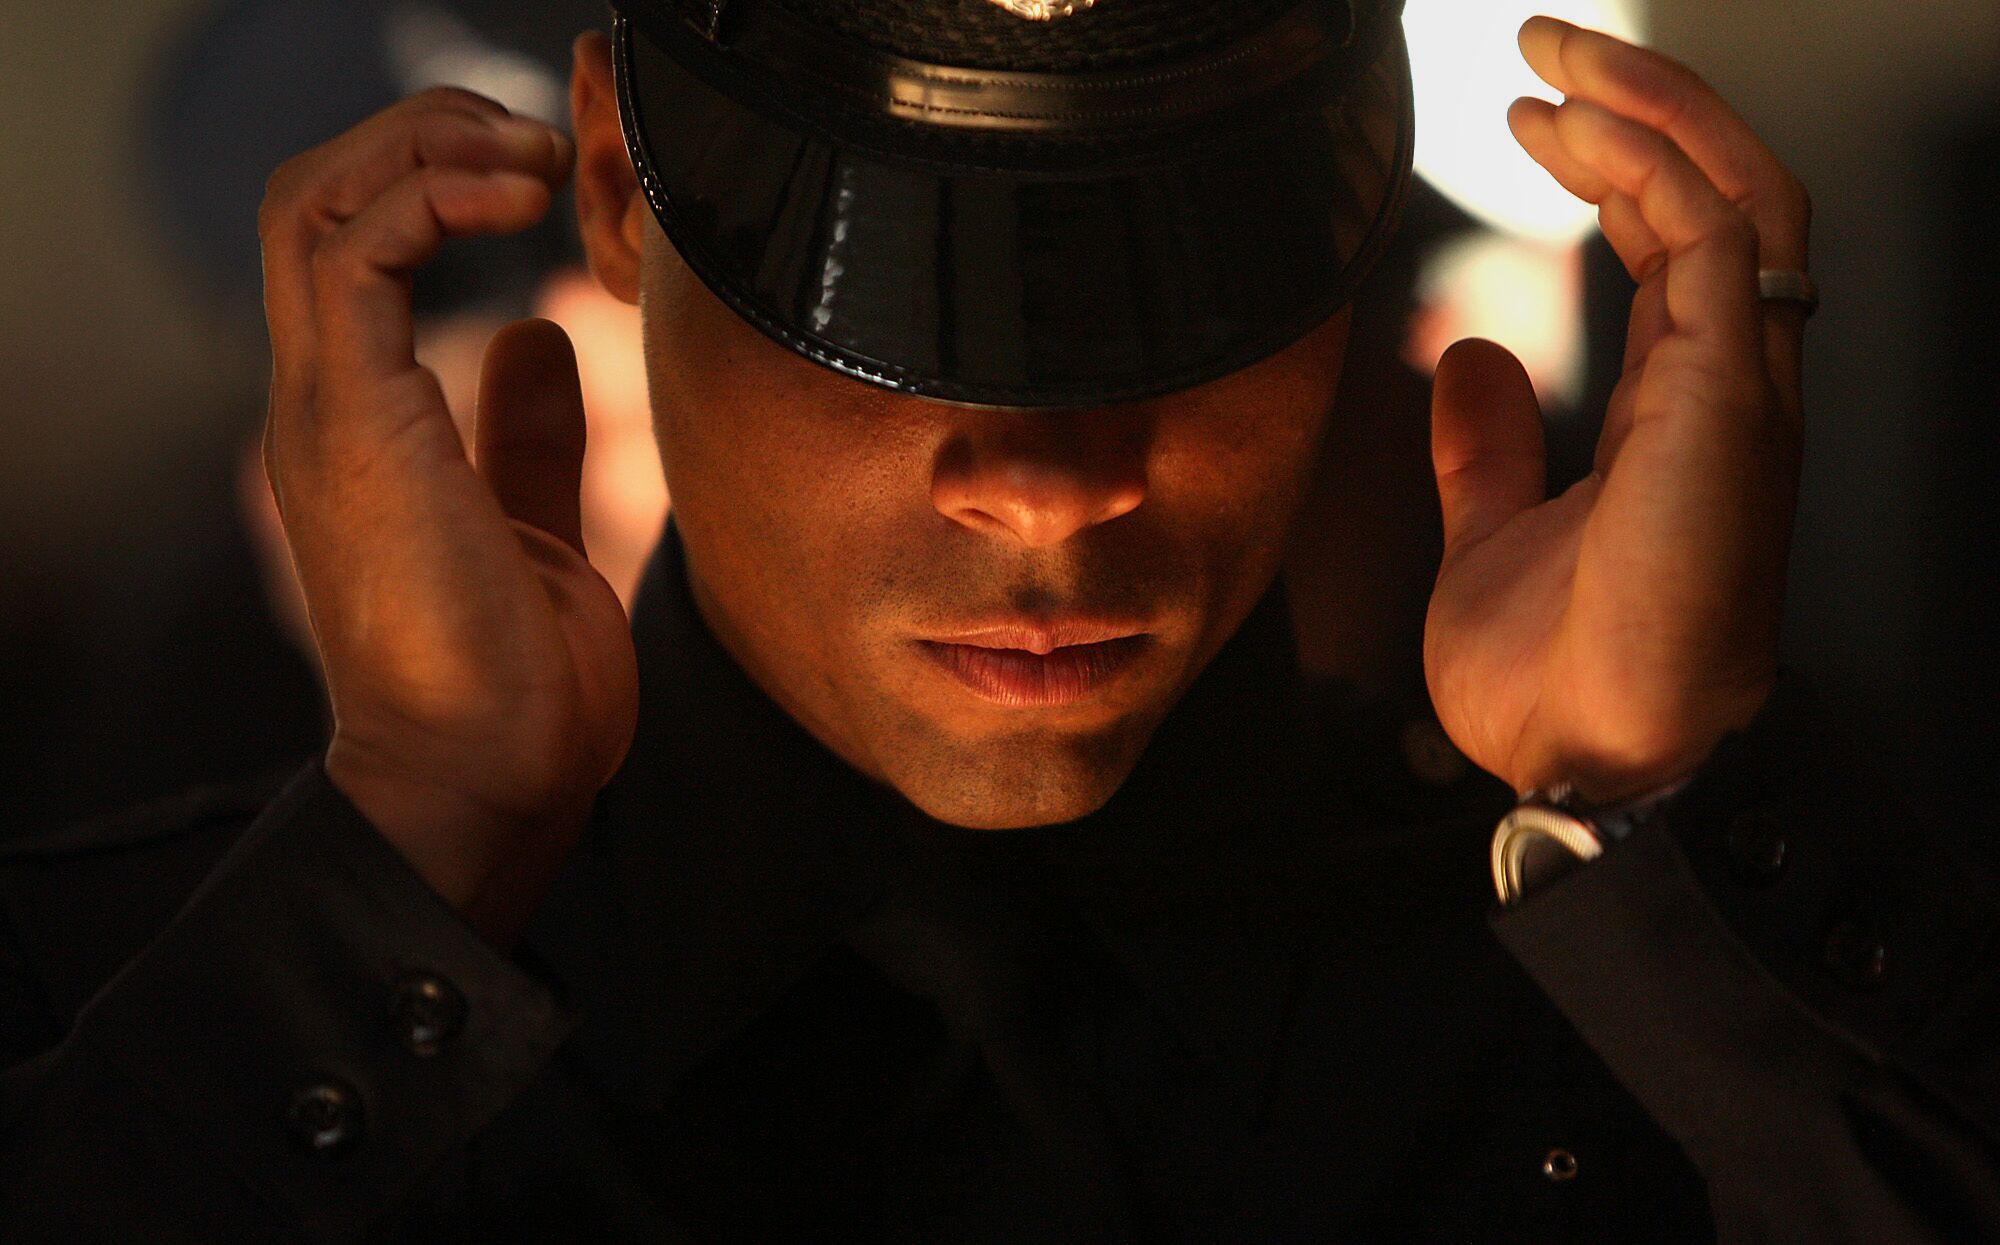 In a head-and-shoulders frame a police officer reaches with his hands to adjust his police cap, which is shielding his eyes.